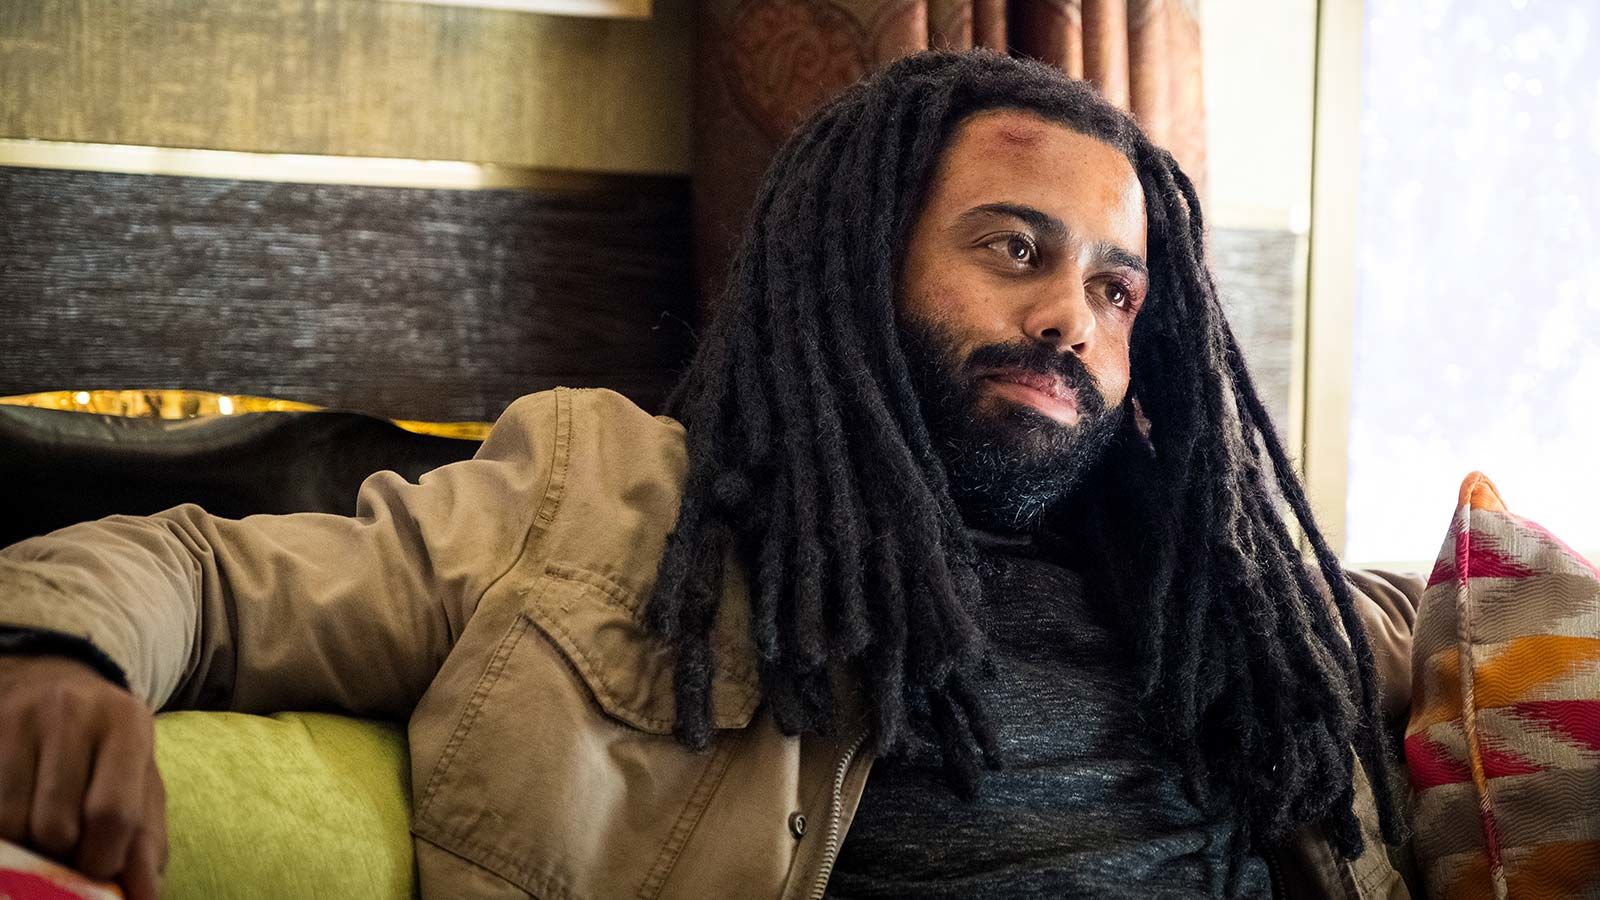 Snowpiercer Episode 4 Recap: Without Their Maker | What to Watch